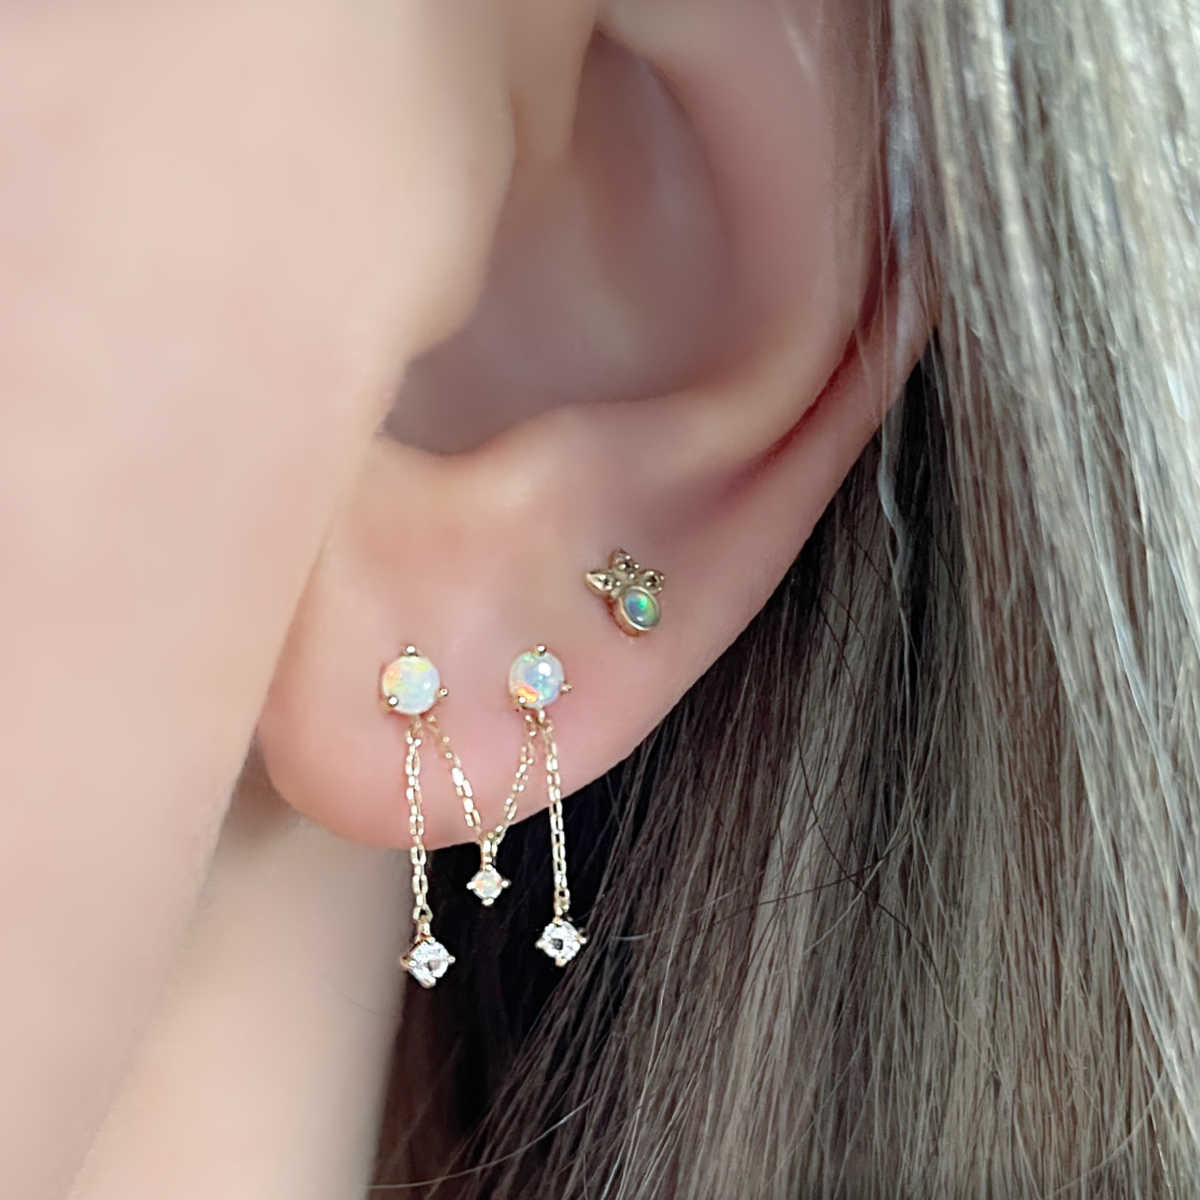 Opal Earring Charm on Lobe | Double Hole Connected Earrings from Two of Most